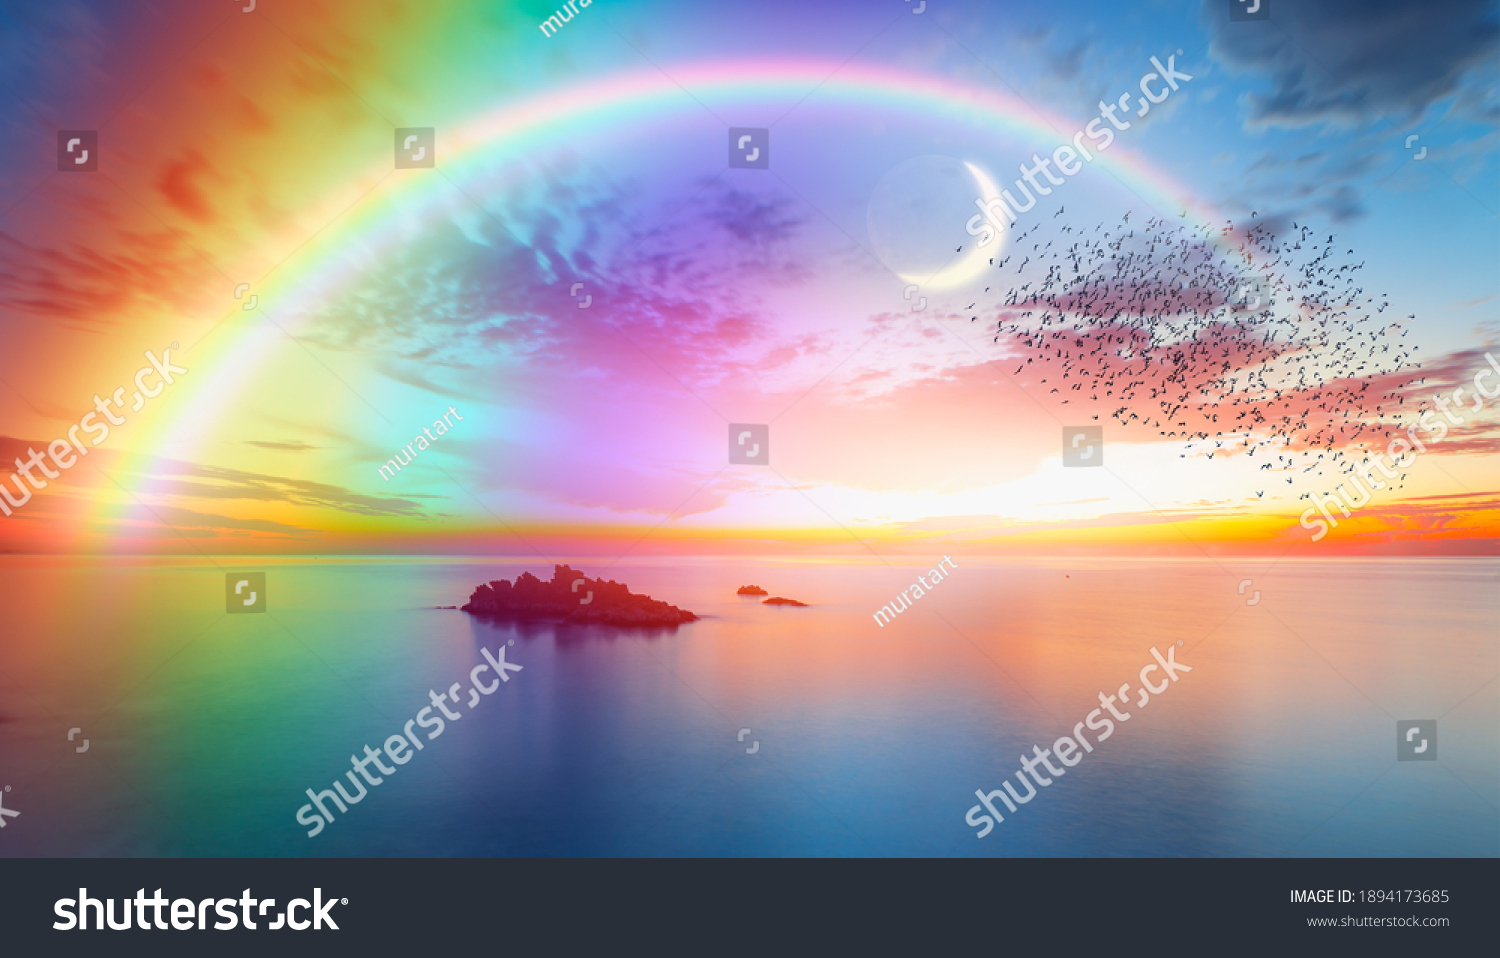 Dusk rainbow concept - Beautiful landscape with multi colored calm sea with double sided rainbow at dusk #1894173685